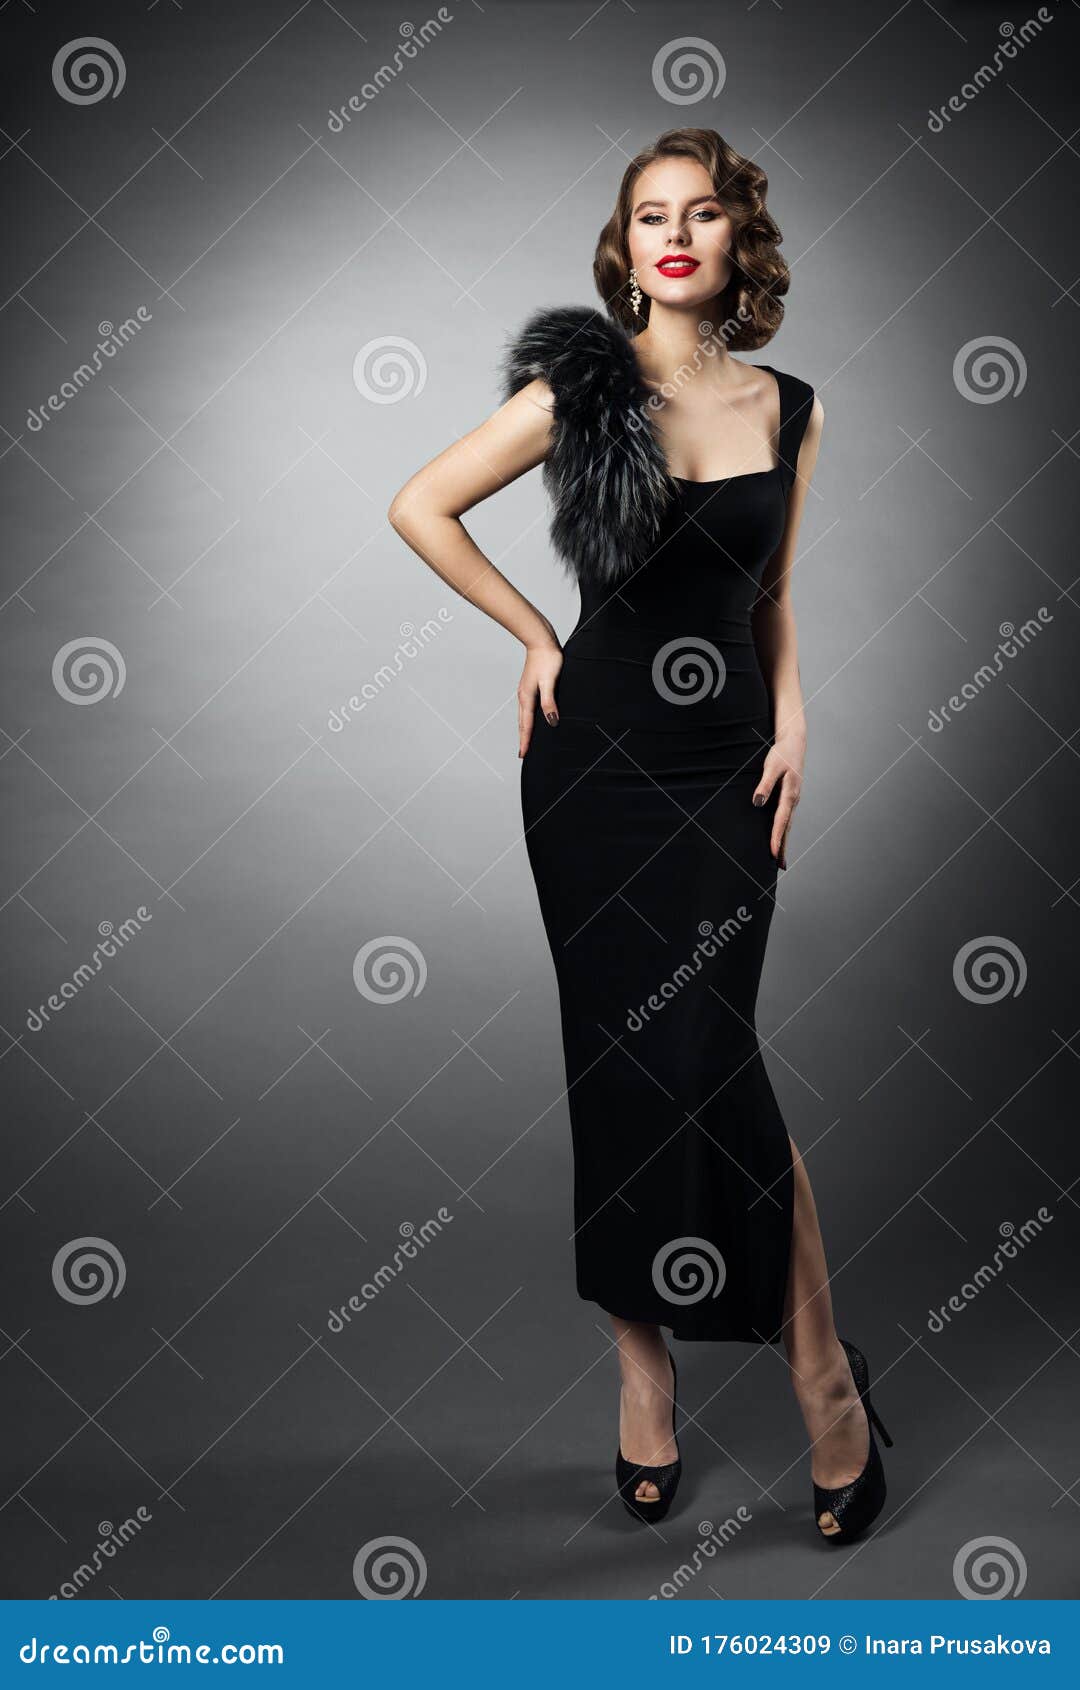 Retro Woman in Long Black Dress, Fashion Model in Evening Gown, Young Girl  Beauty Studio Portrait Stock Image - Image of fashionable, fashioned:  176024309